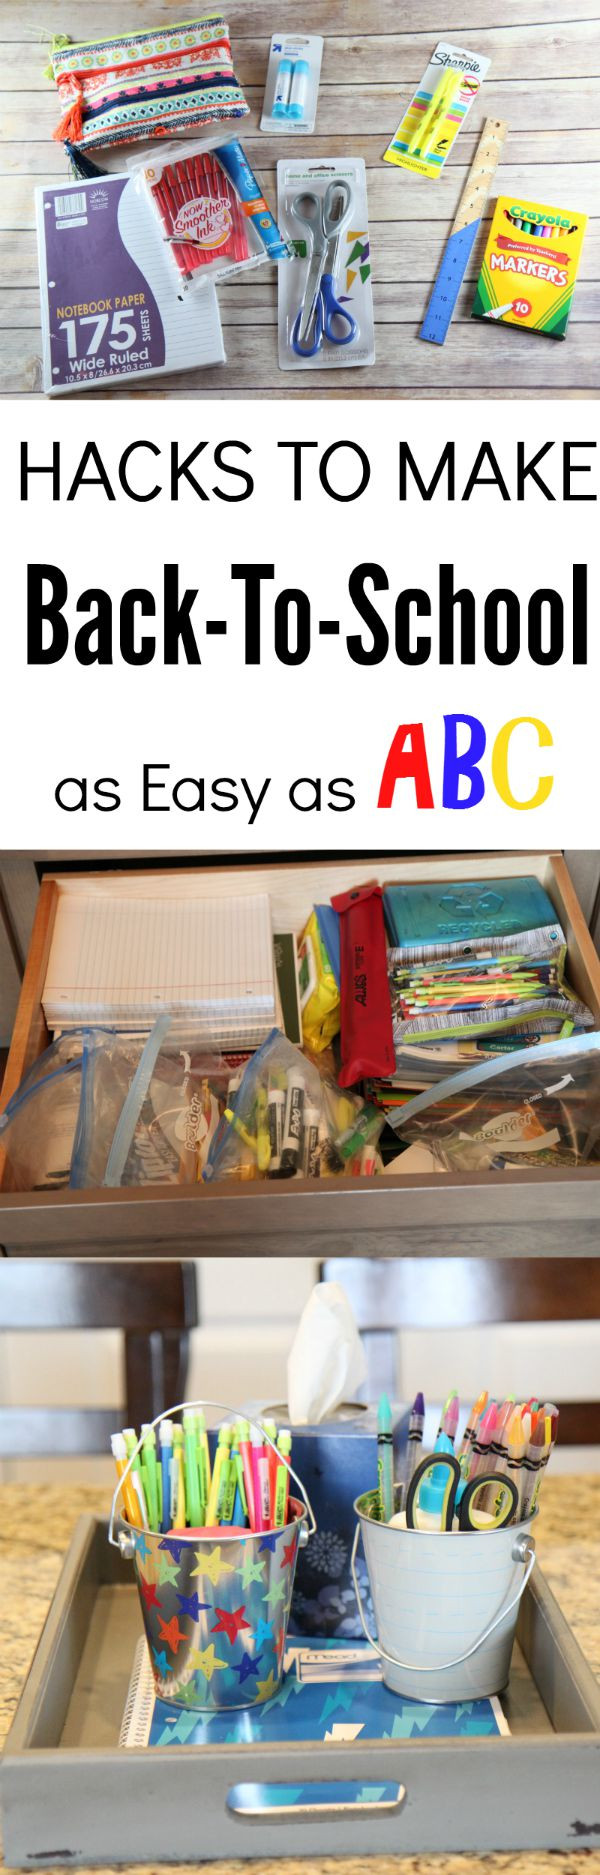 Back To School Hacks
 Hacks to Make Back To School Shopping as Easy as ABC